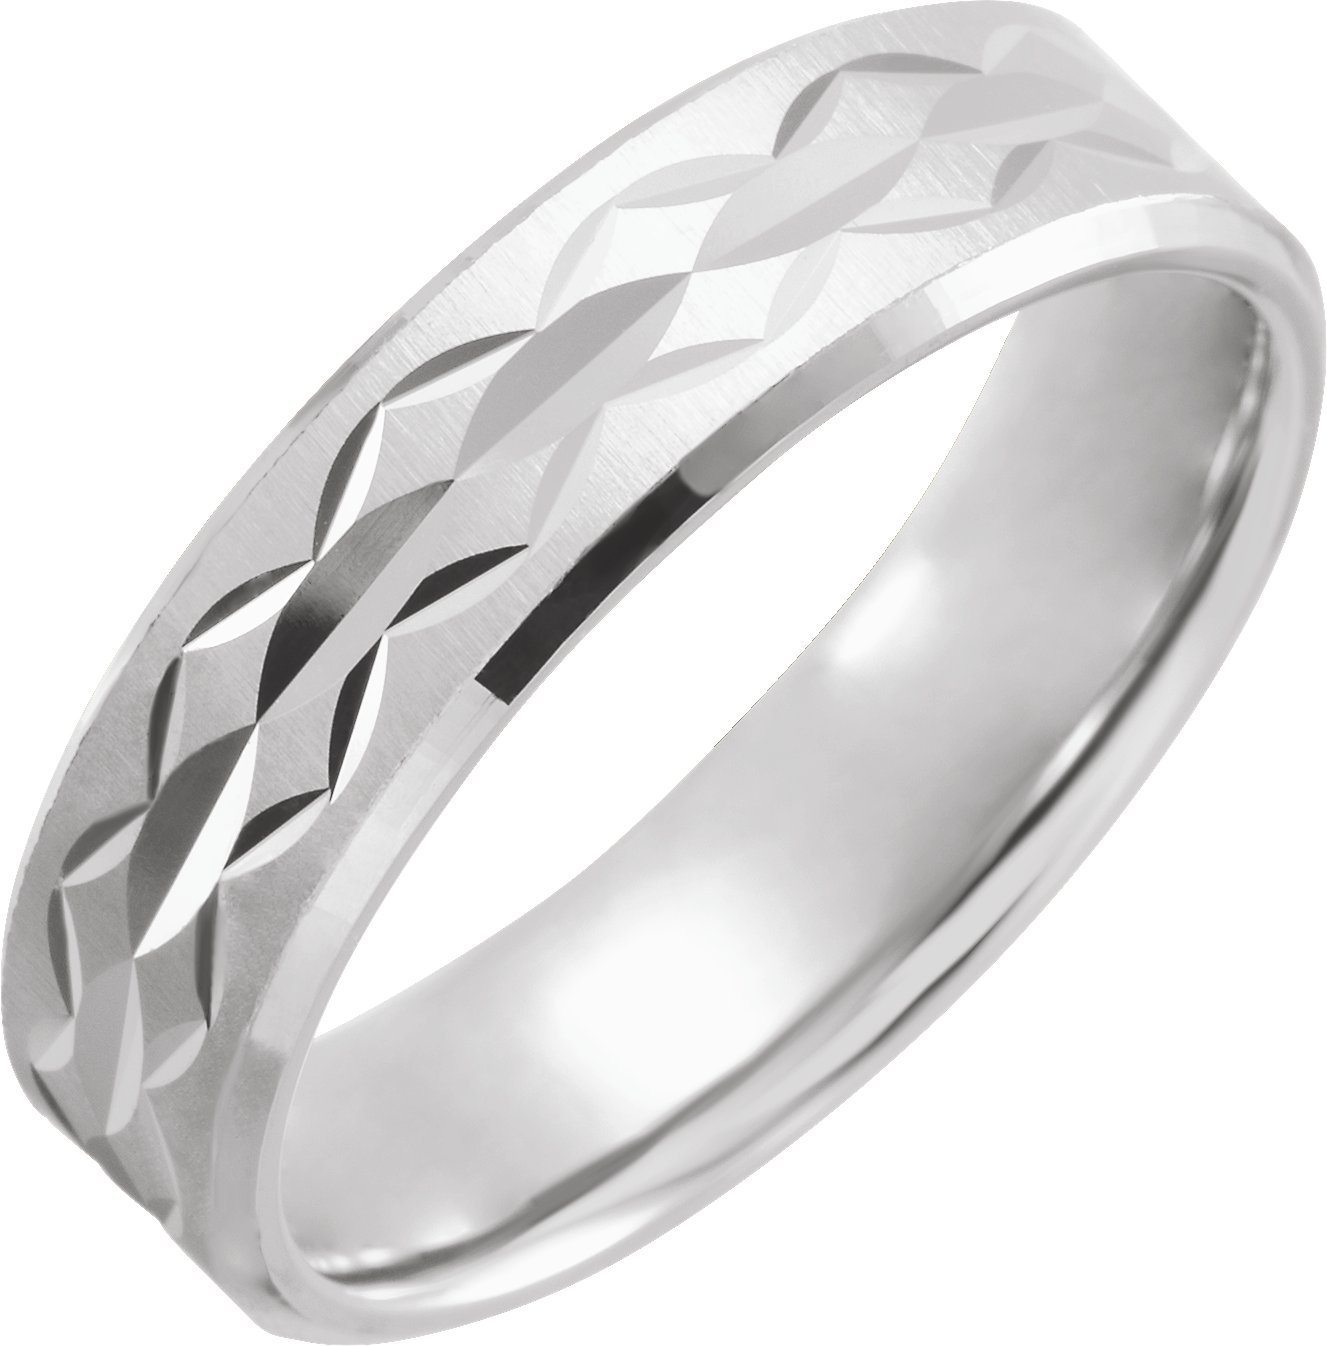 Continuum Sterling Silver 6 mm Design Band with Satin Polished Finish Size 5 Ref 16486063